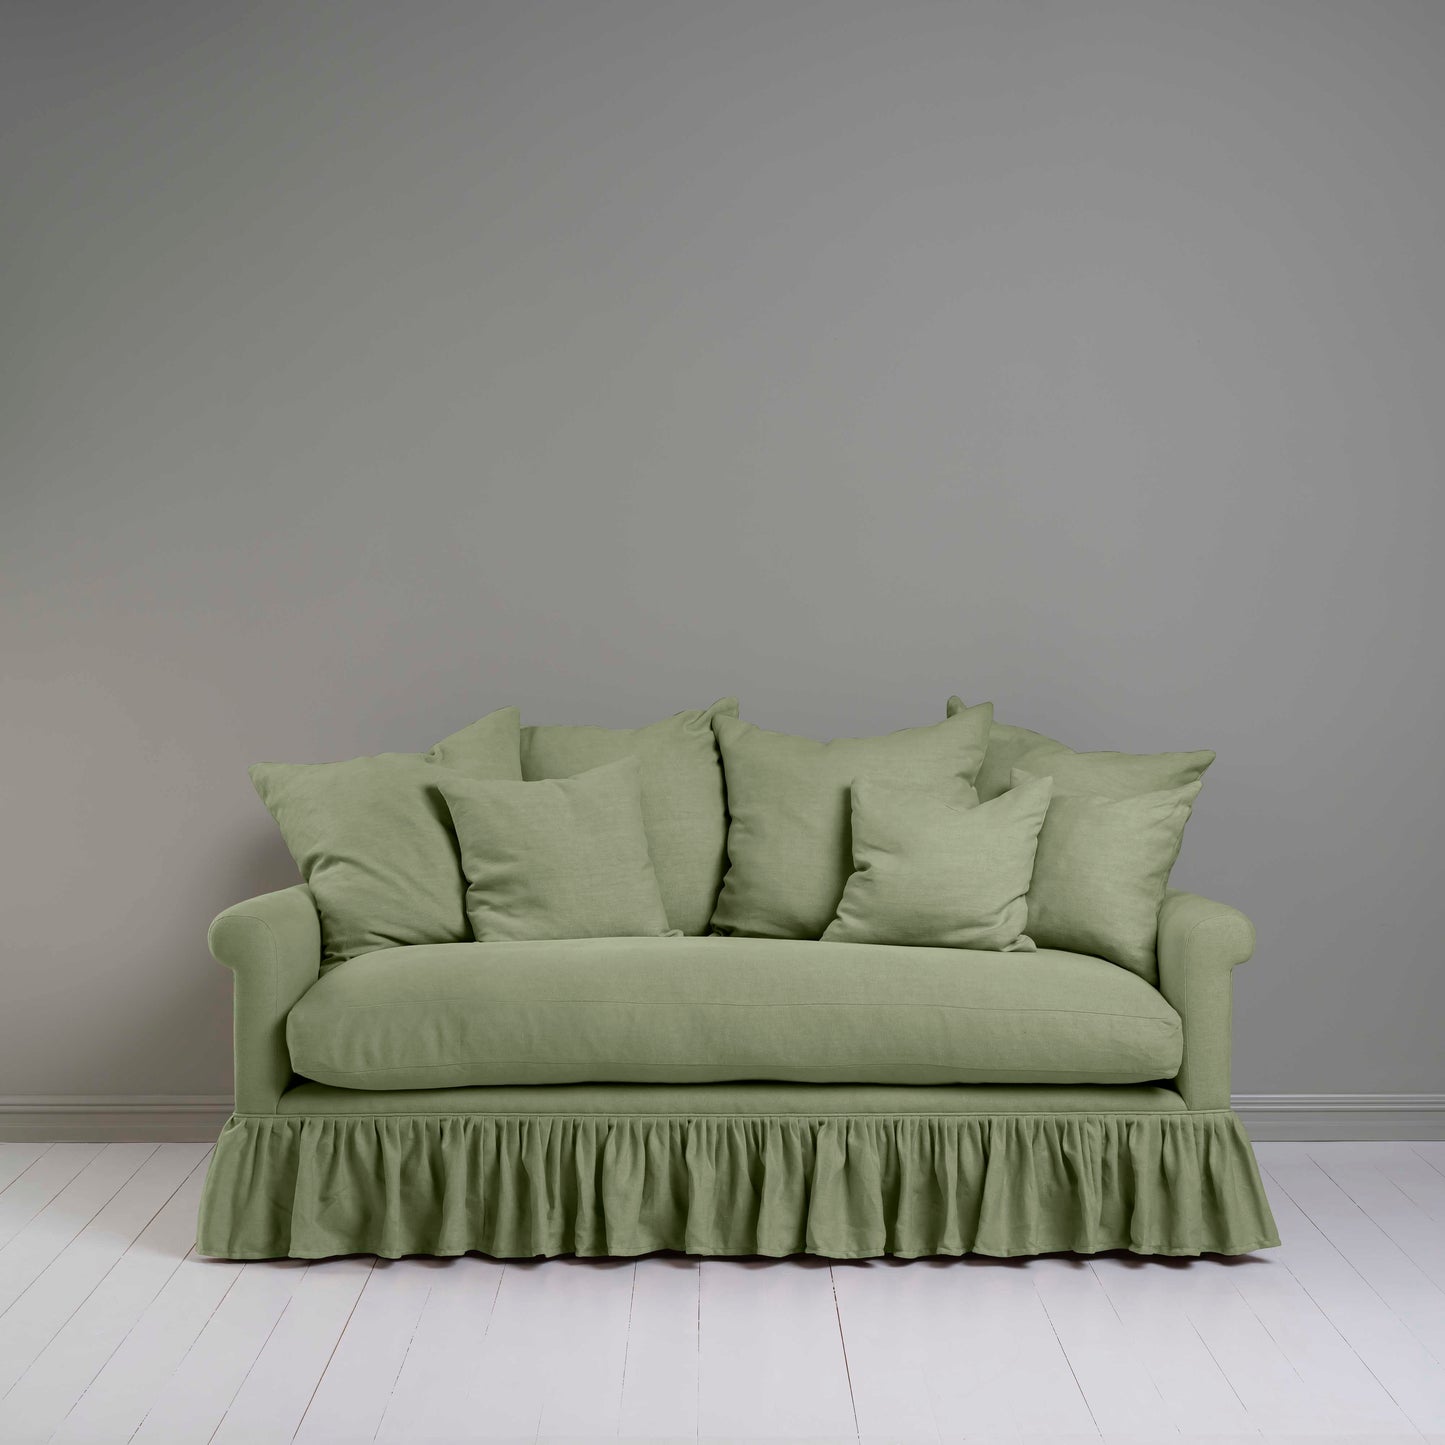 Curtain Call 3 Seater Sofa in Laidback Linen Moss